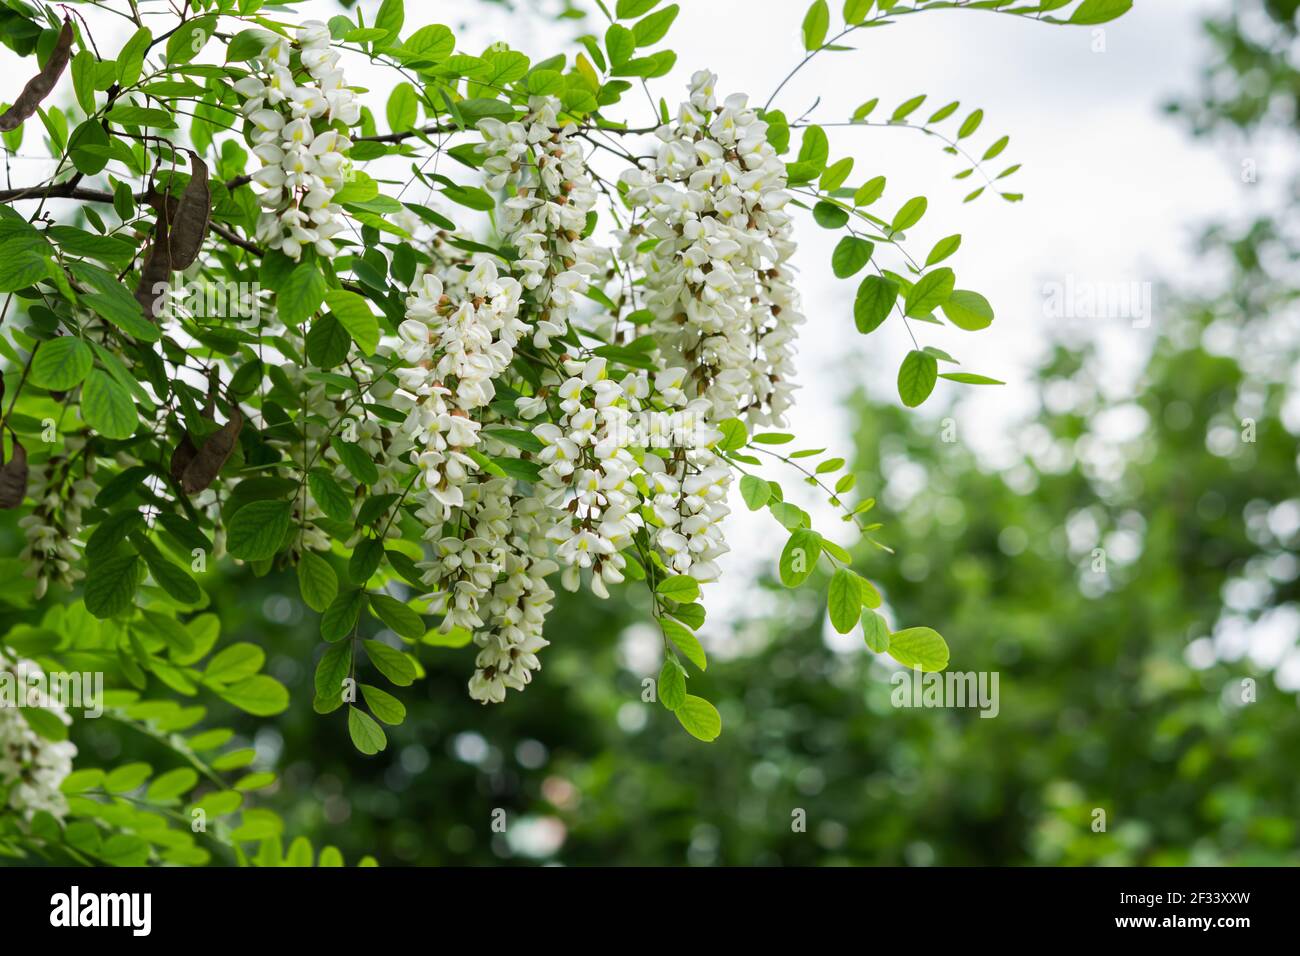 Flowers of white acacia lat. Robinia. close-up. Spring natural background. Collecting blooming flowers for alternative medicine in the month of May. B Stock Photo